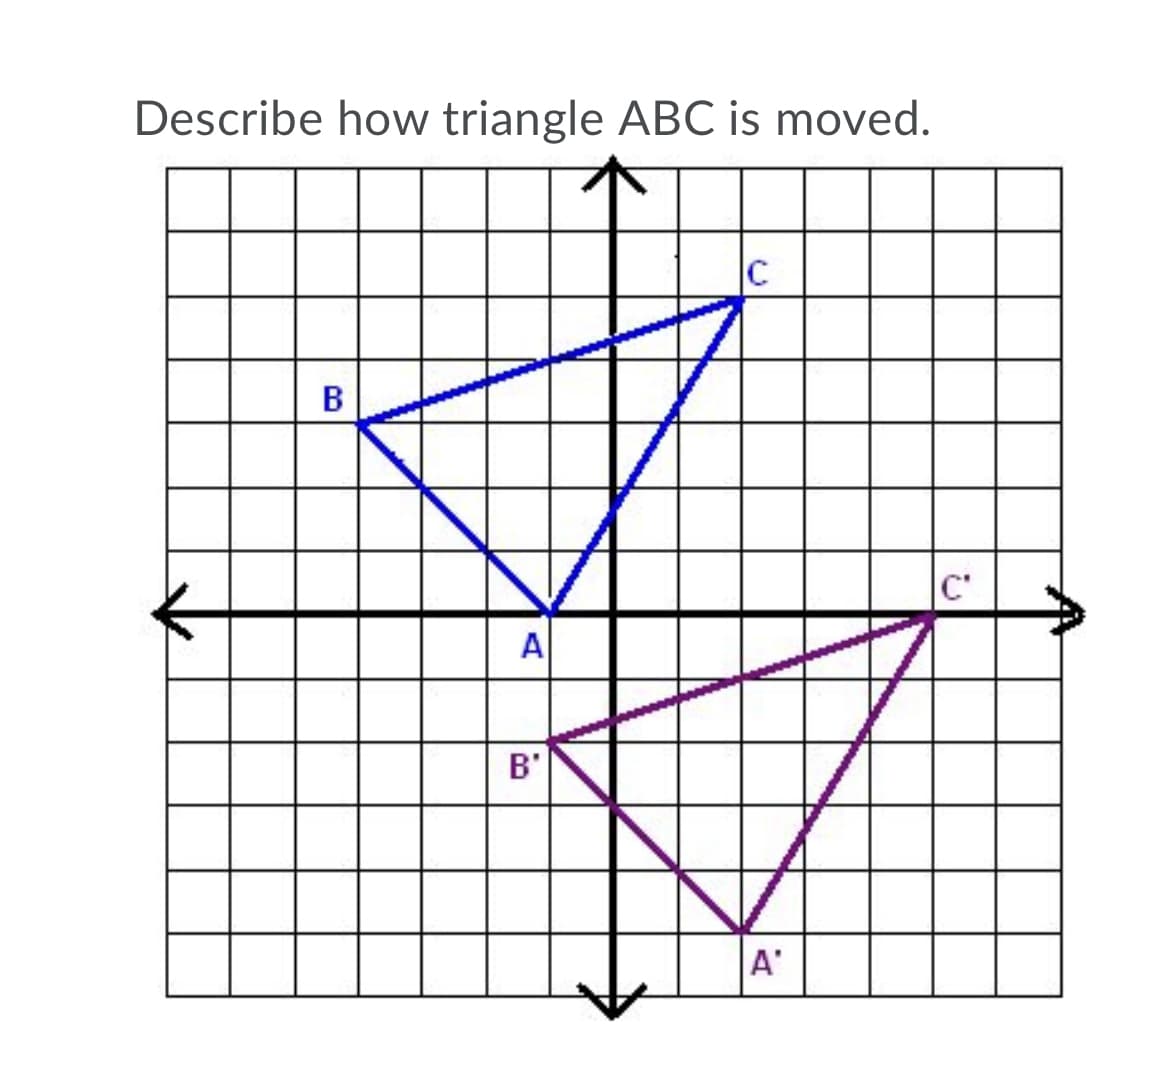 Describe how triangle ABC is moved.
C
В
C'
A
B'
A'
